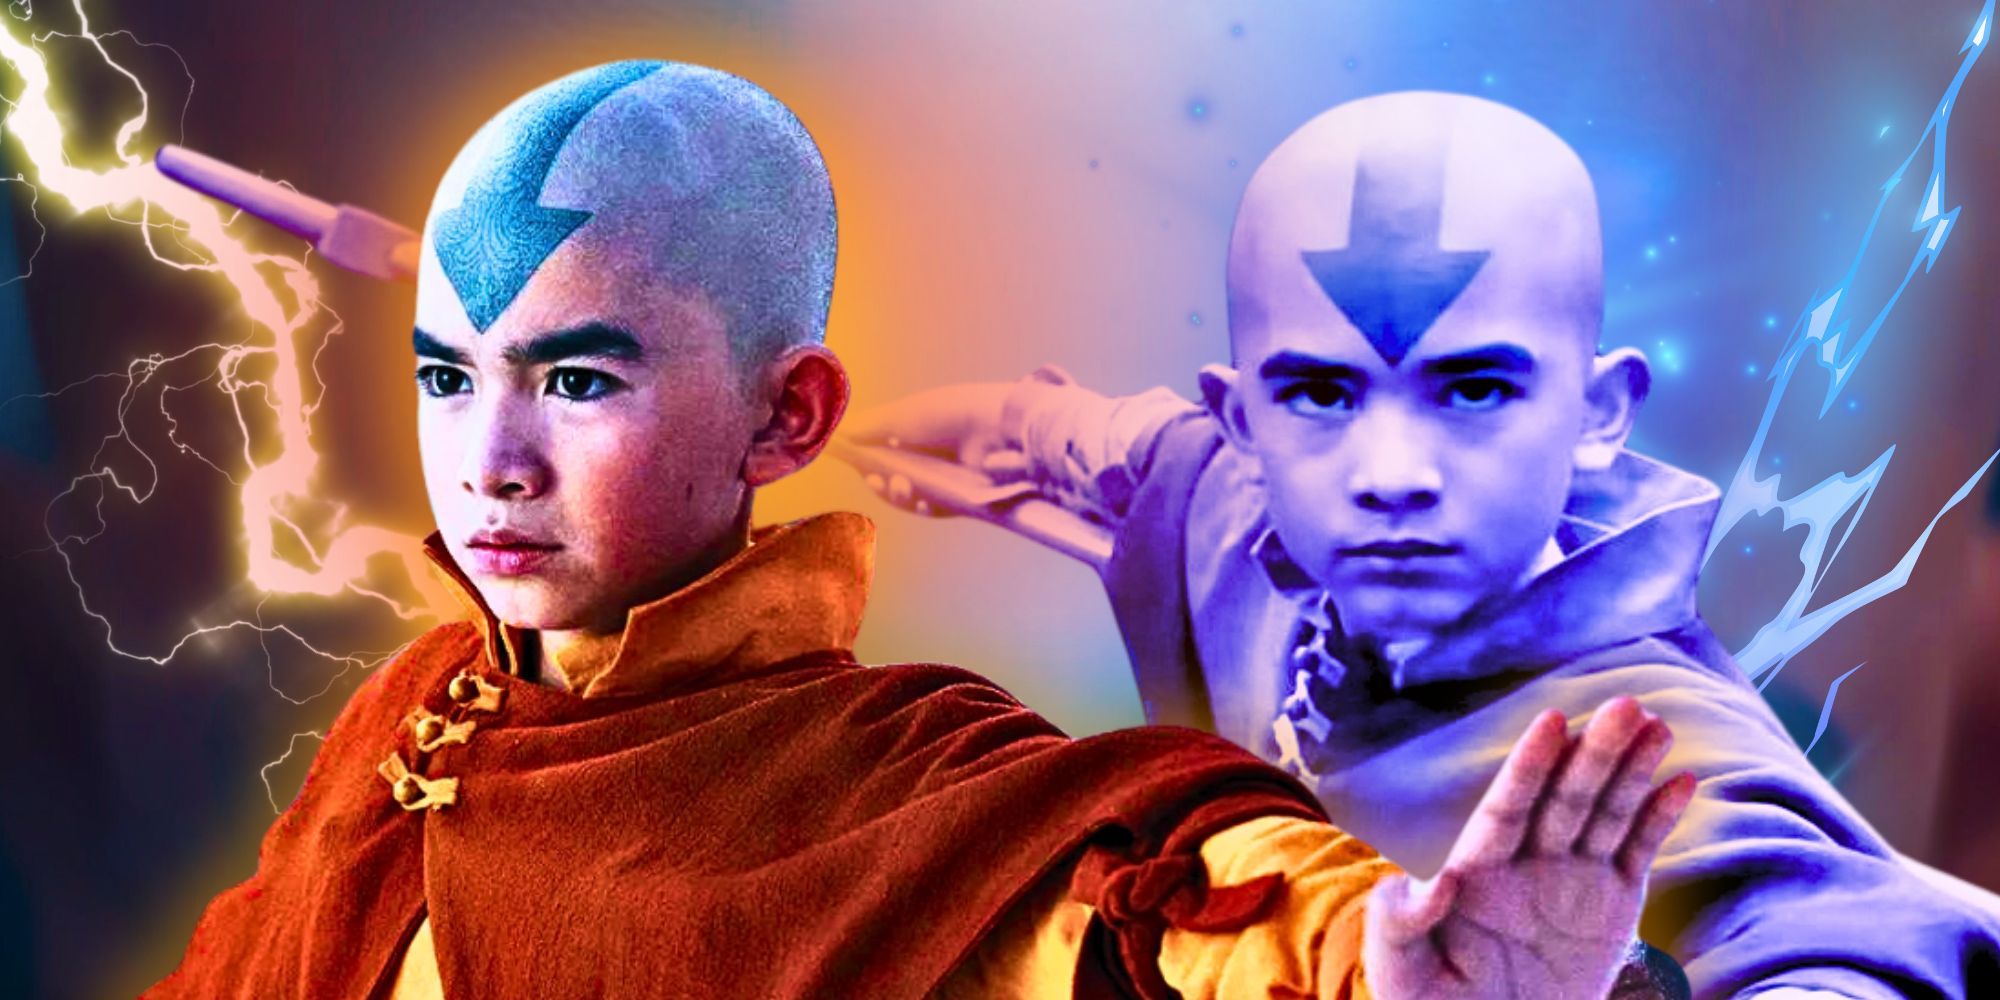 Two images of Aang from Netflix's Avatar: The Last Airbender bending 